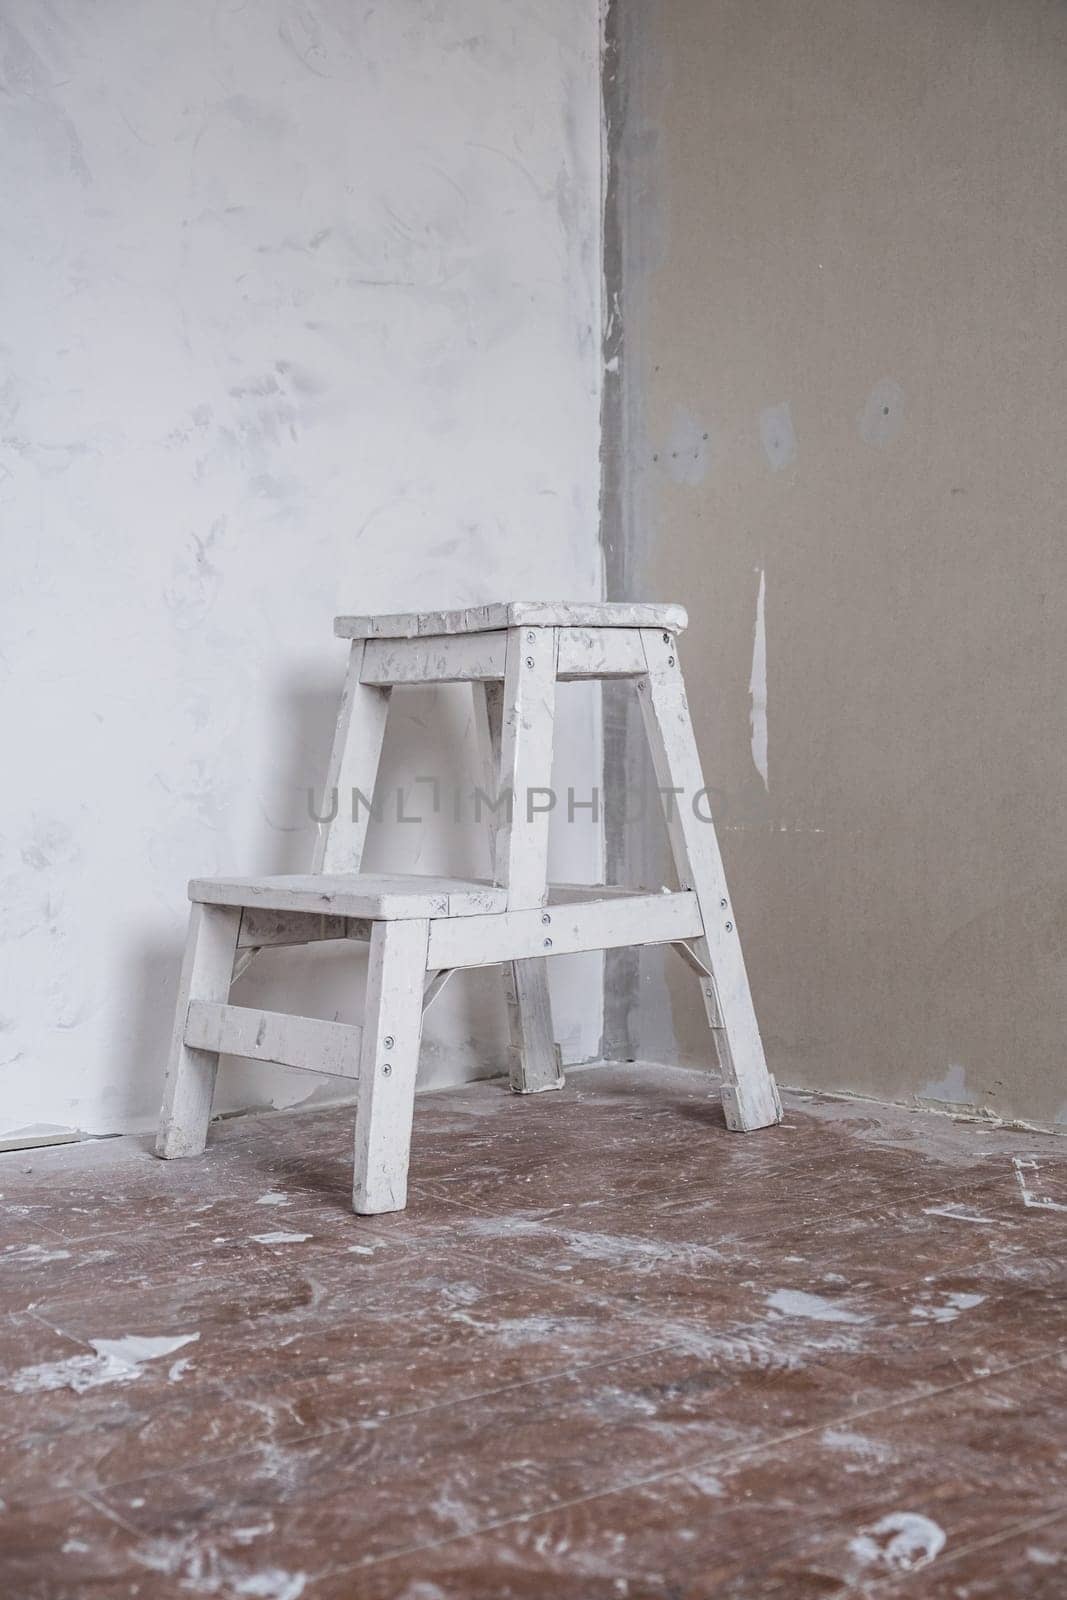 Applying decorative putty. A white repair chair. White abstract texture of surface covered with putty. textured background of filler paste applied with putty knife in irregular dashes and strokes.